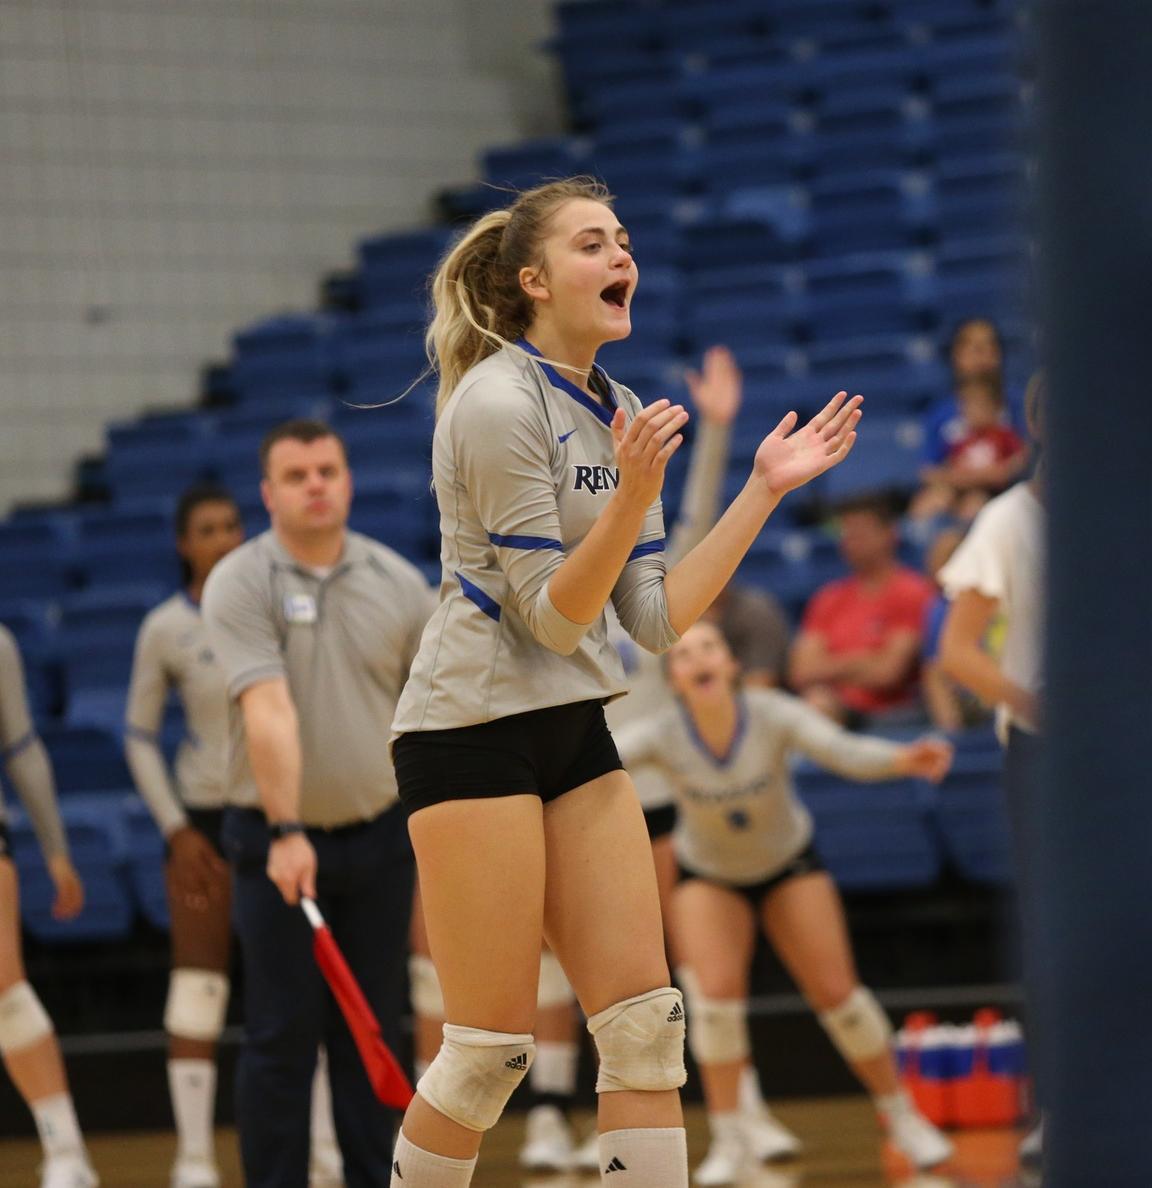 Reivers sweep Central CC on the road